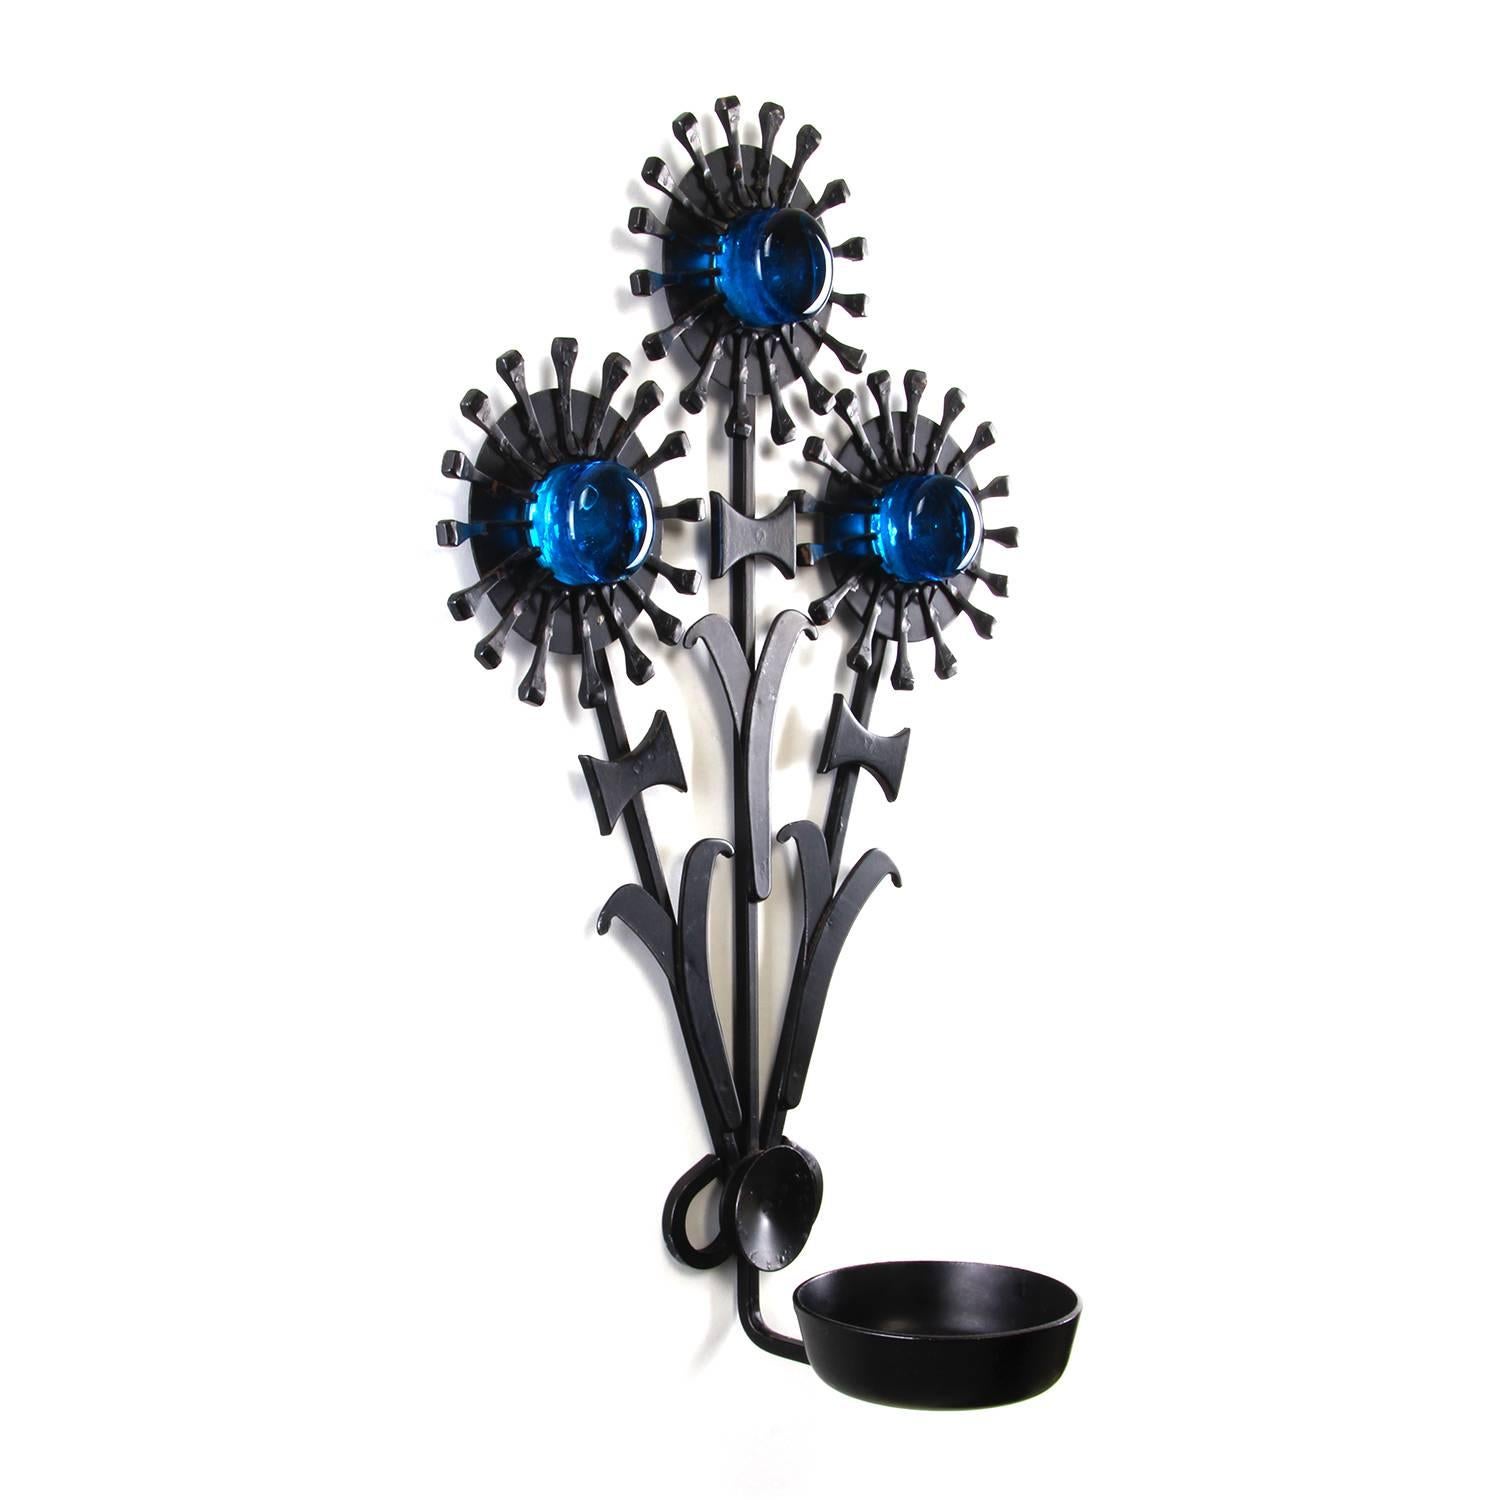 Mid-Century Modern Sconce, Wrought Iron by Dantoft, 1960s, Beautiful Candle Holder with Blue Glass For Sale